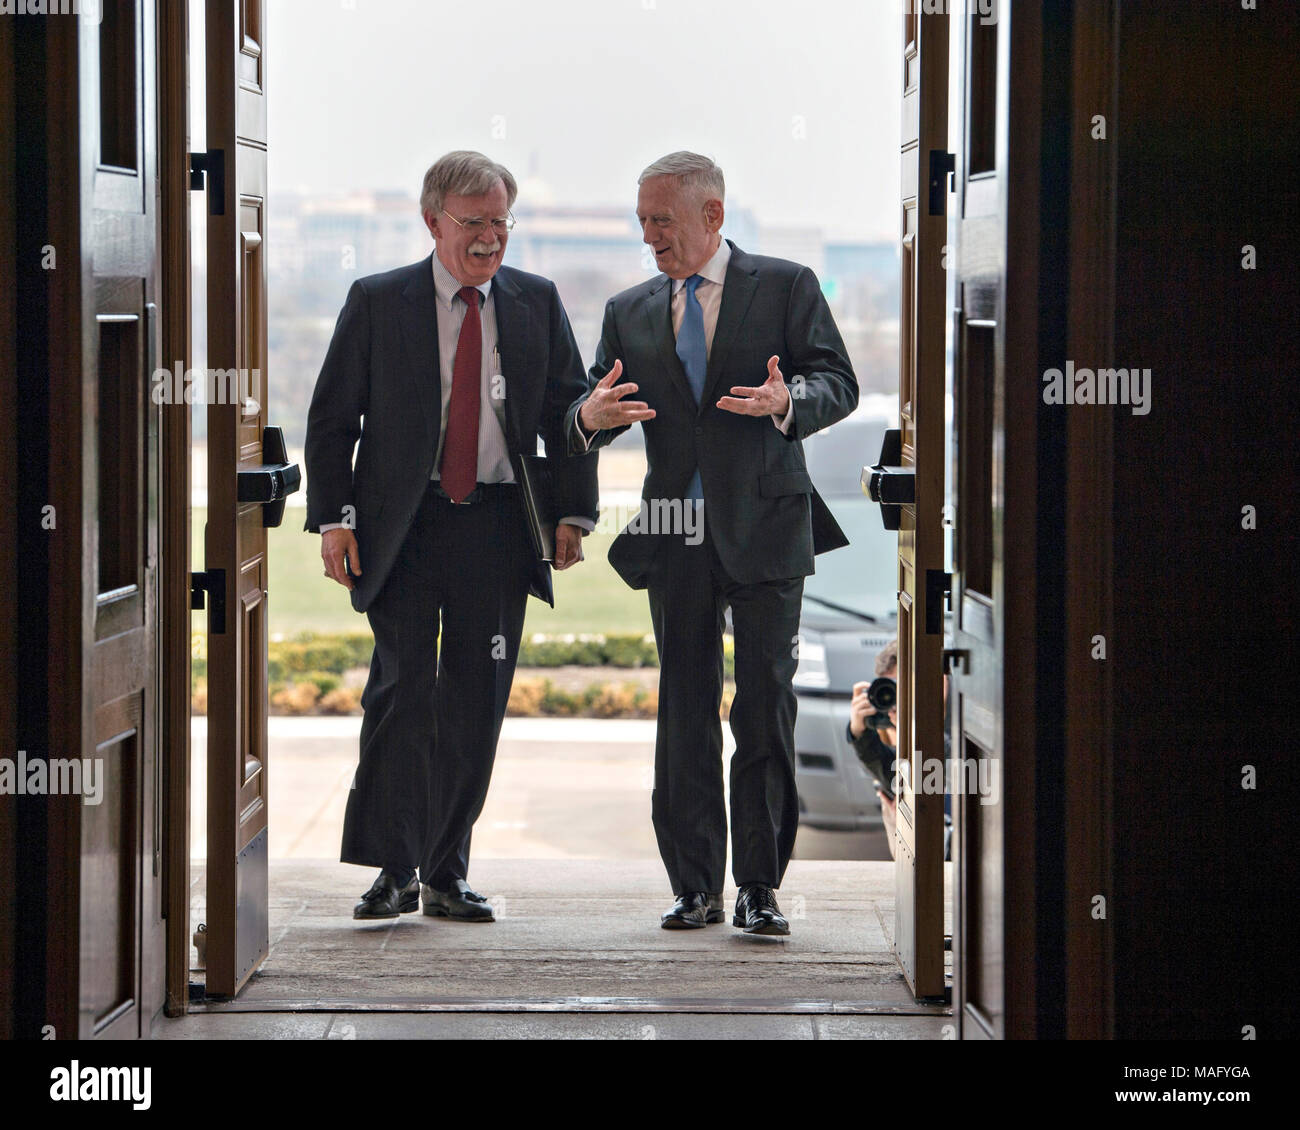 U.S. Secretary of Defense James Mattis, right, escorts the newly appointed National Security Advisor John Bolton on arrival at the Pentagon March 29, 2018 in Arlington, Virginia. Stock Photo